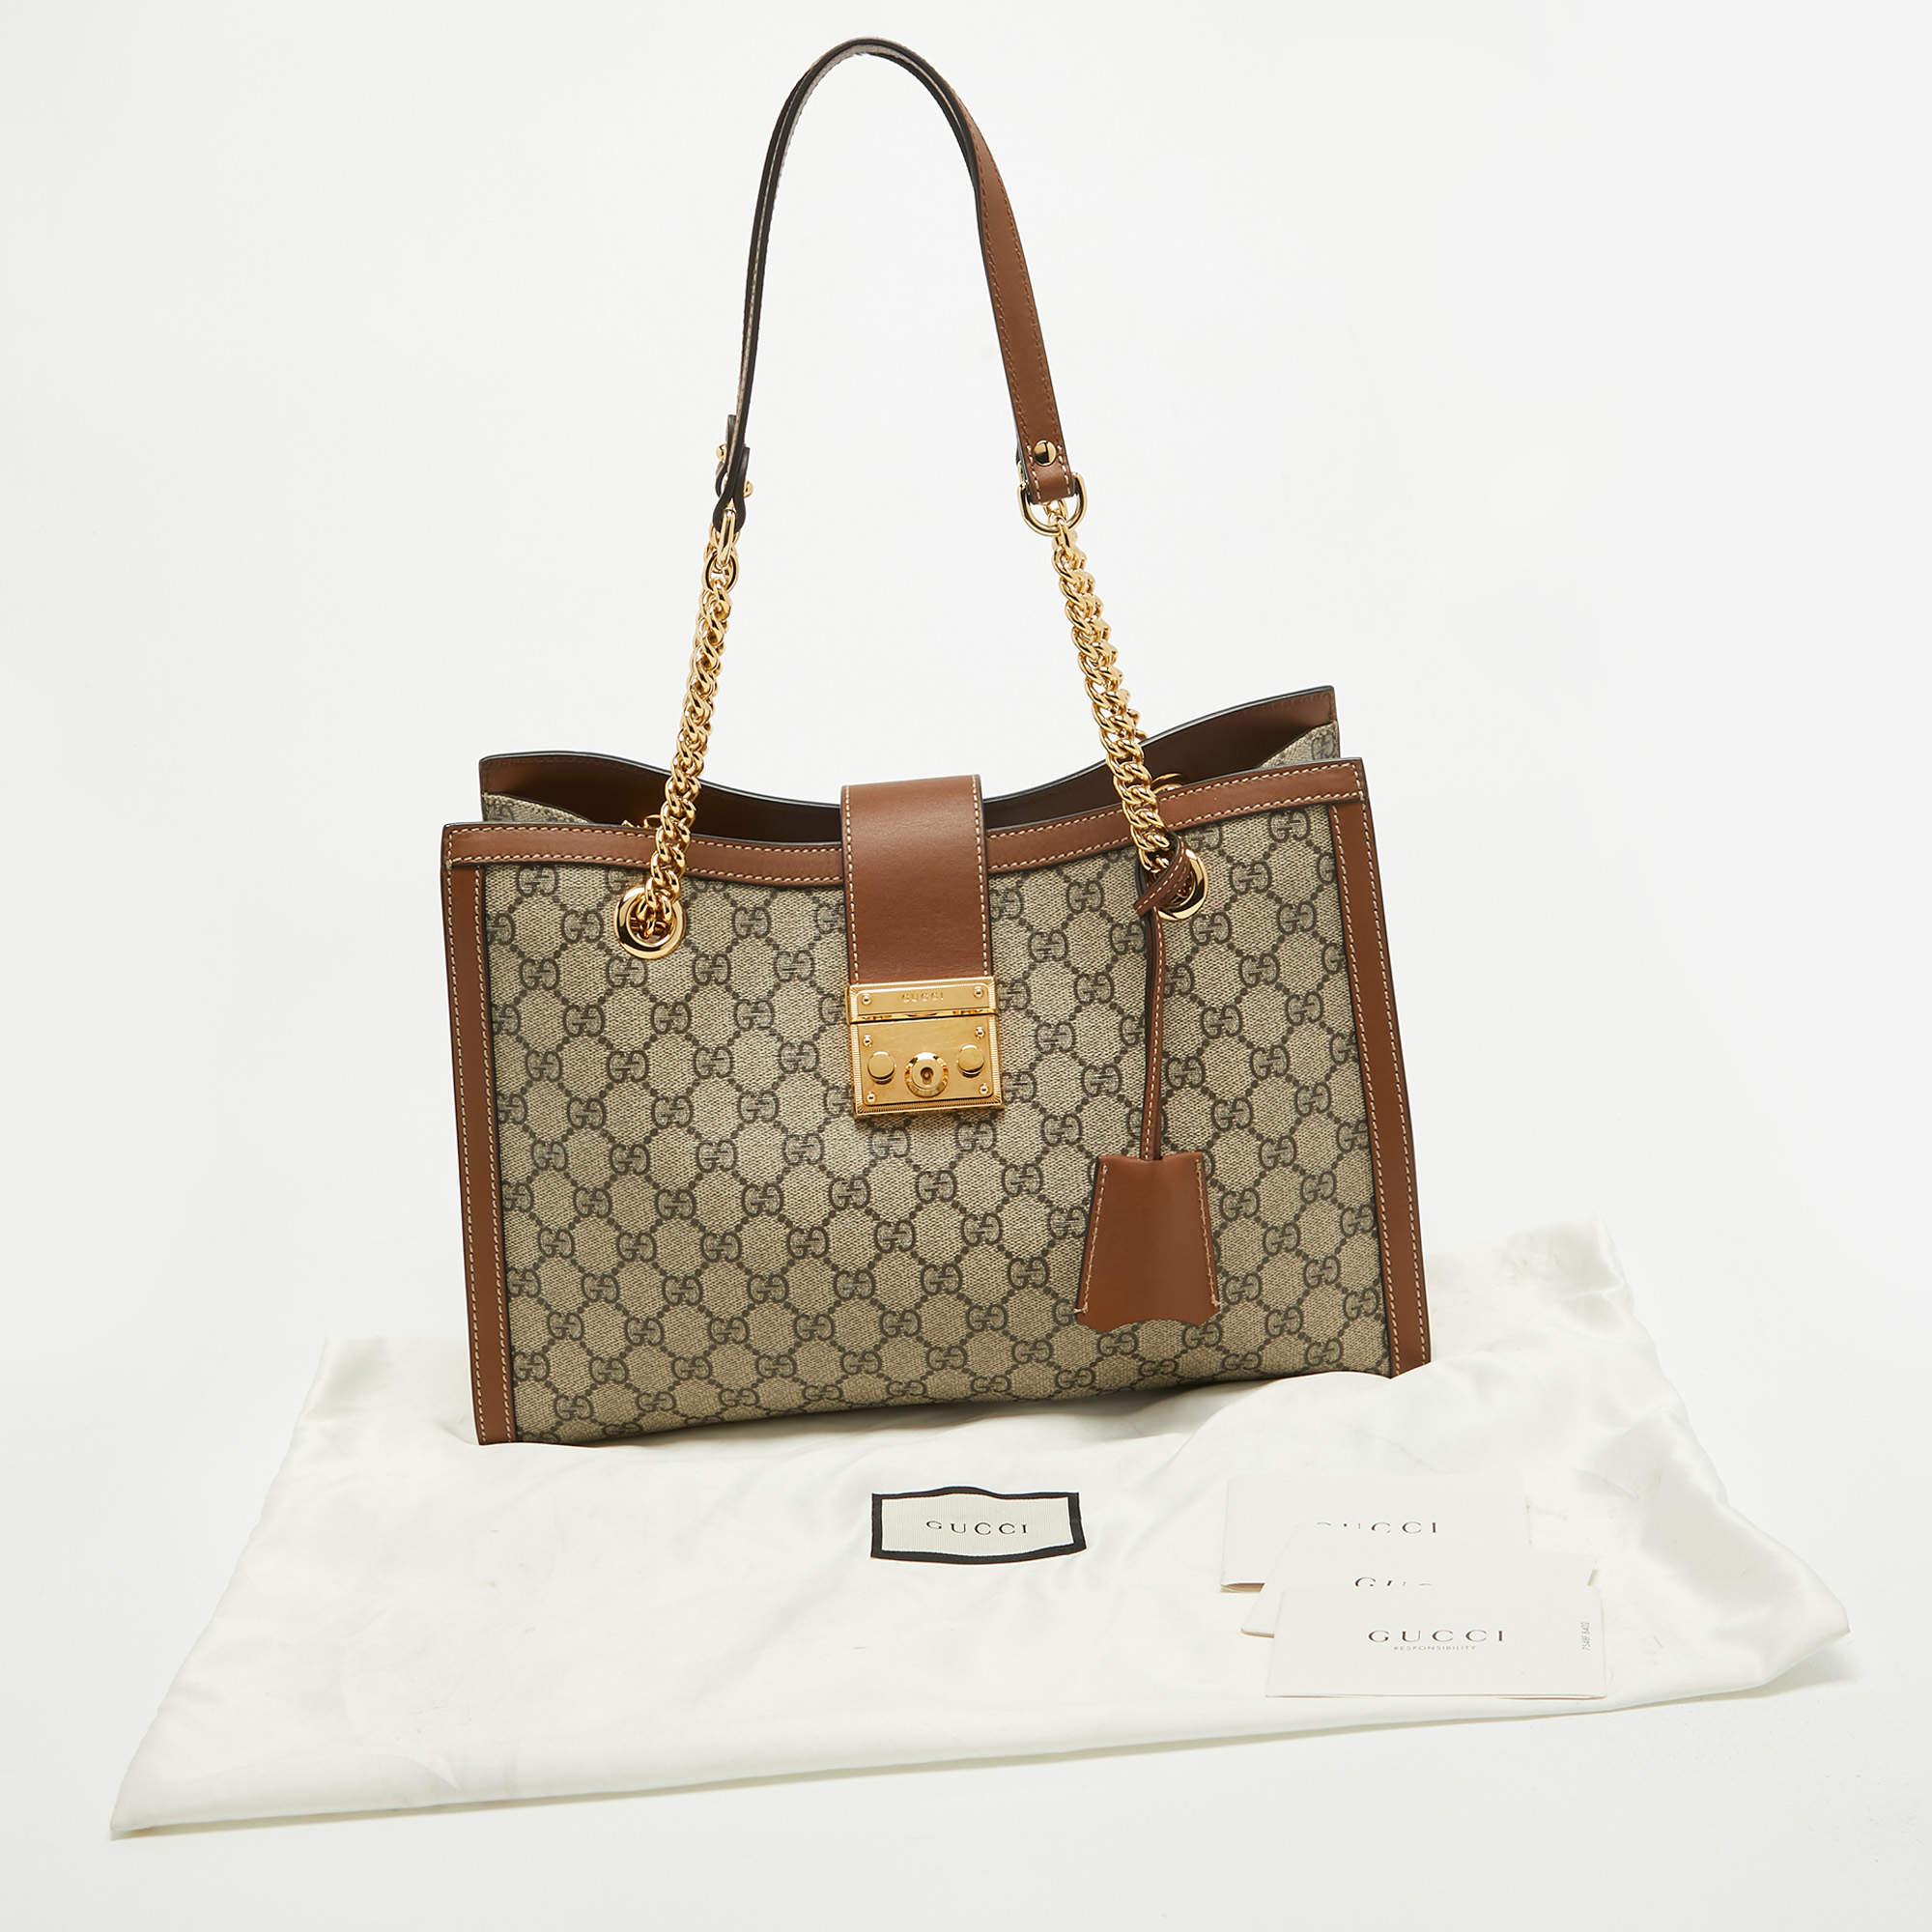 Women's Gucci Beige/Brown GG Supreme Canvas and Leather Medium Padlock Tote